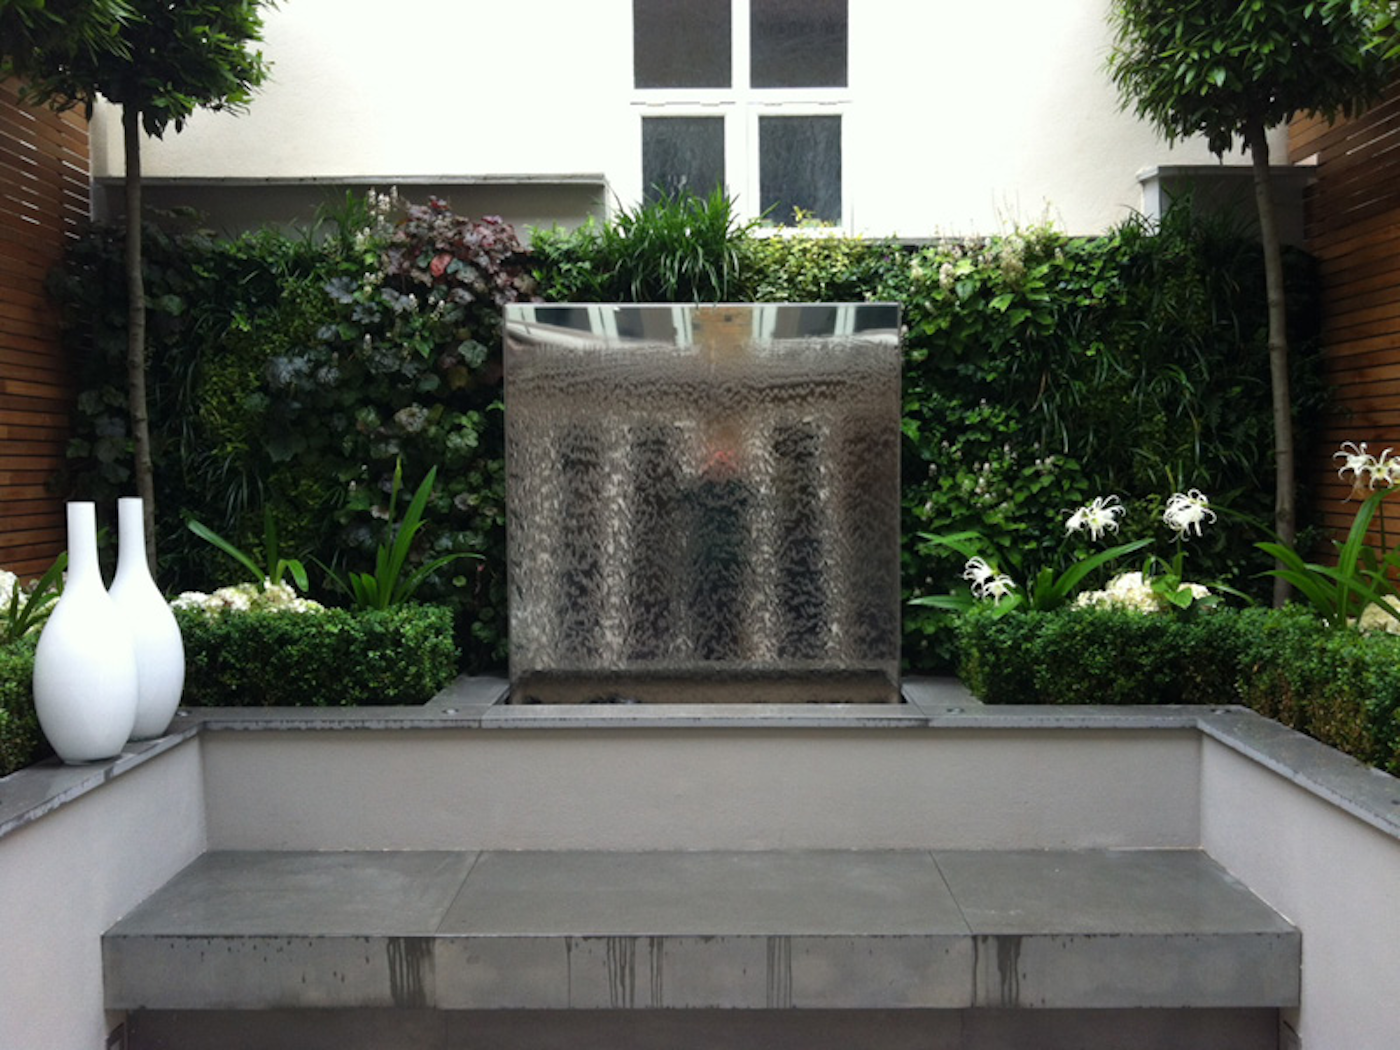 livng wall surrounding a water feature and other aesthetic garden features